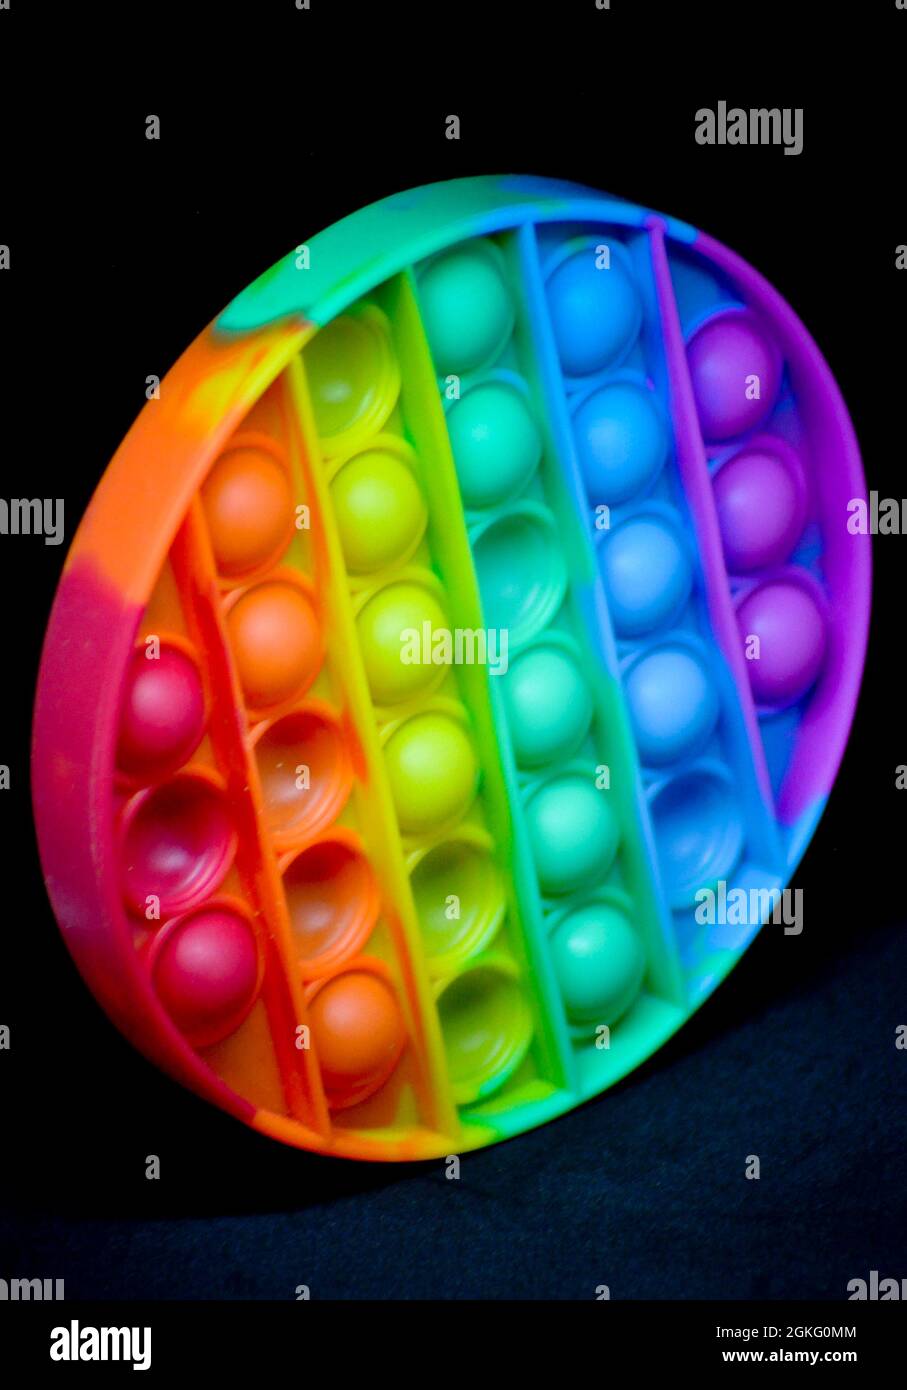 Rainbow coloured fidget popper toy to help relieve anxiety or sensory difficulties in children. Image is set against a black background Stock Photo